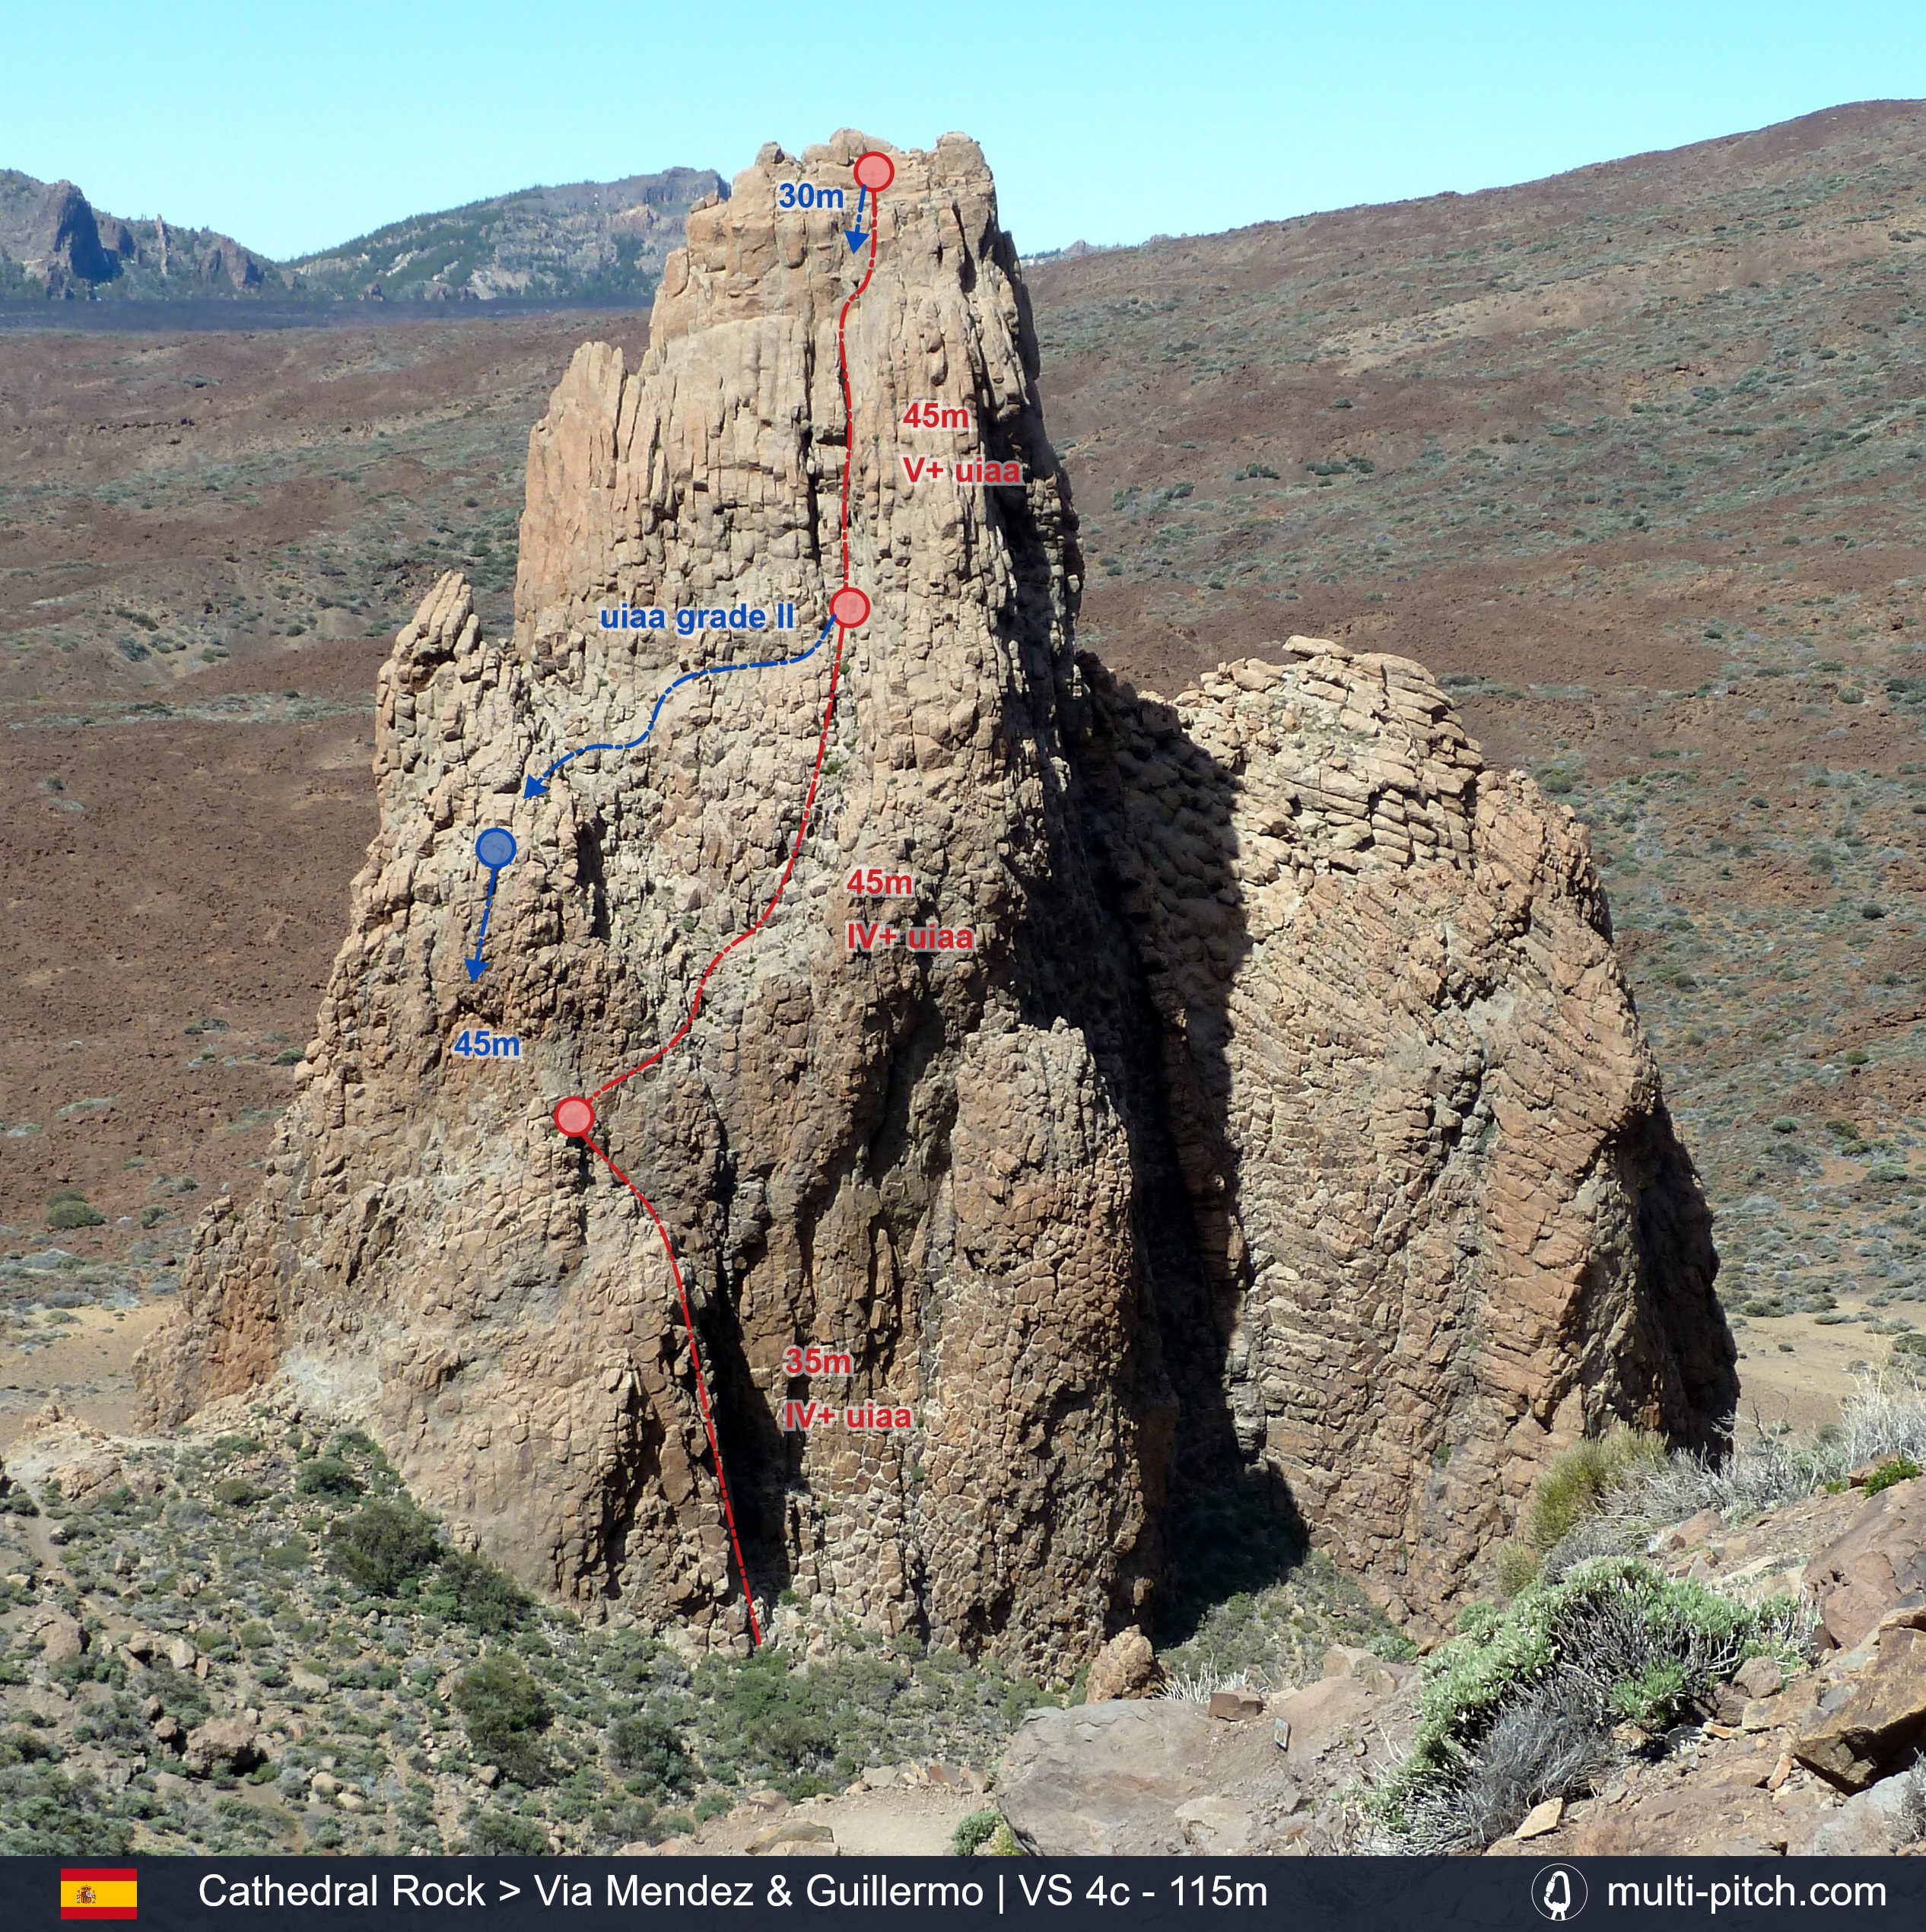 Trad Climbing lines on Cathederal Rock in Tenerife